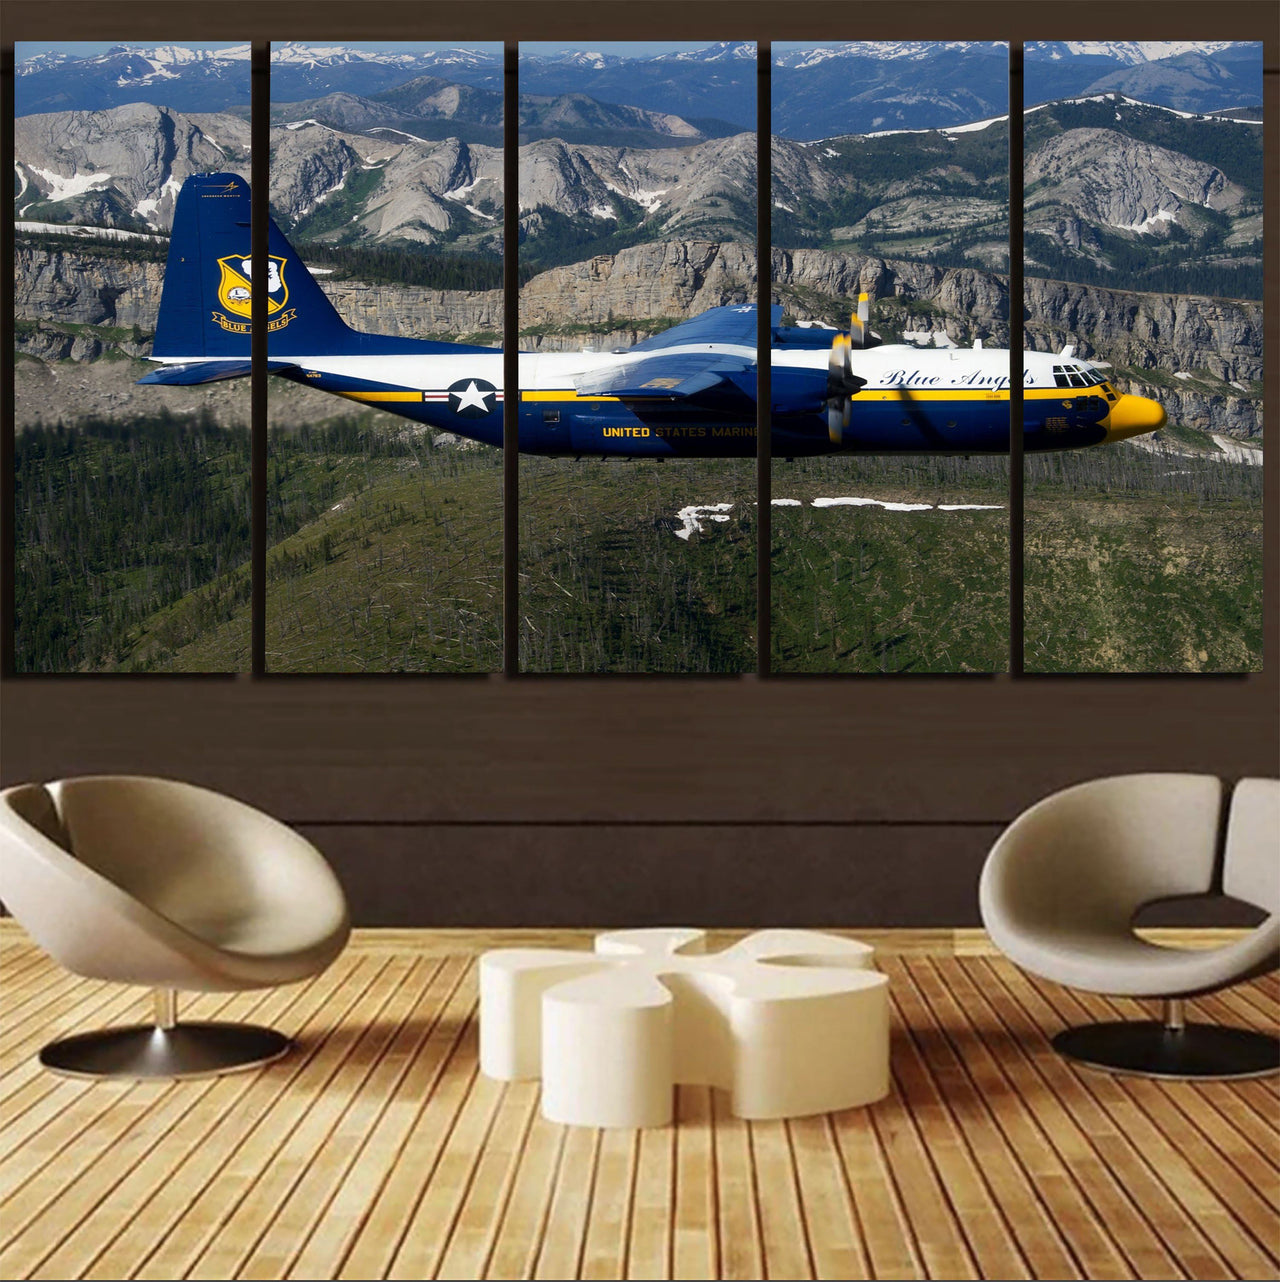 Amazing View with Blue Angels Aircraft Printed Canvas Prints (5 Pieces) Aviation Shop 